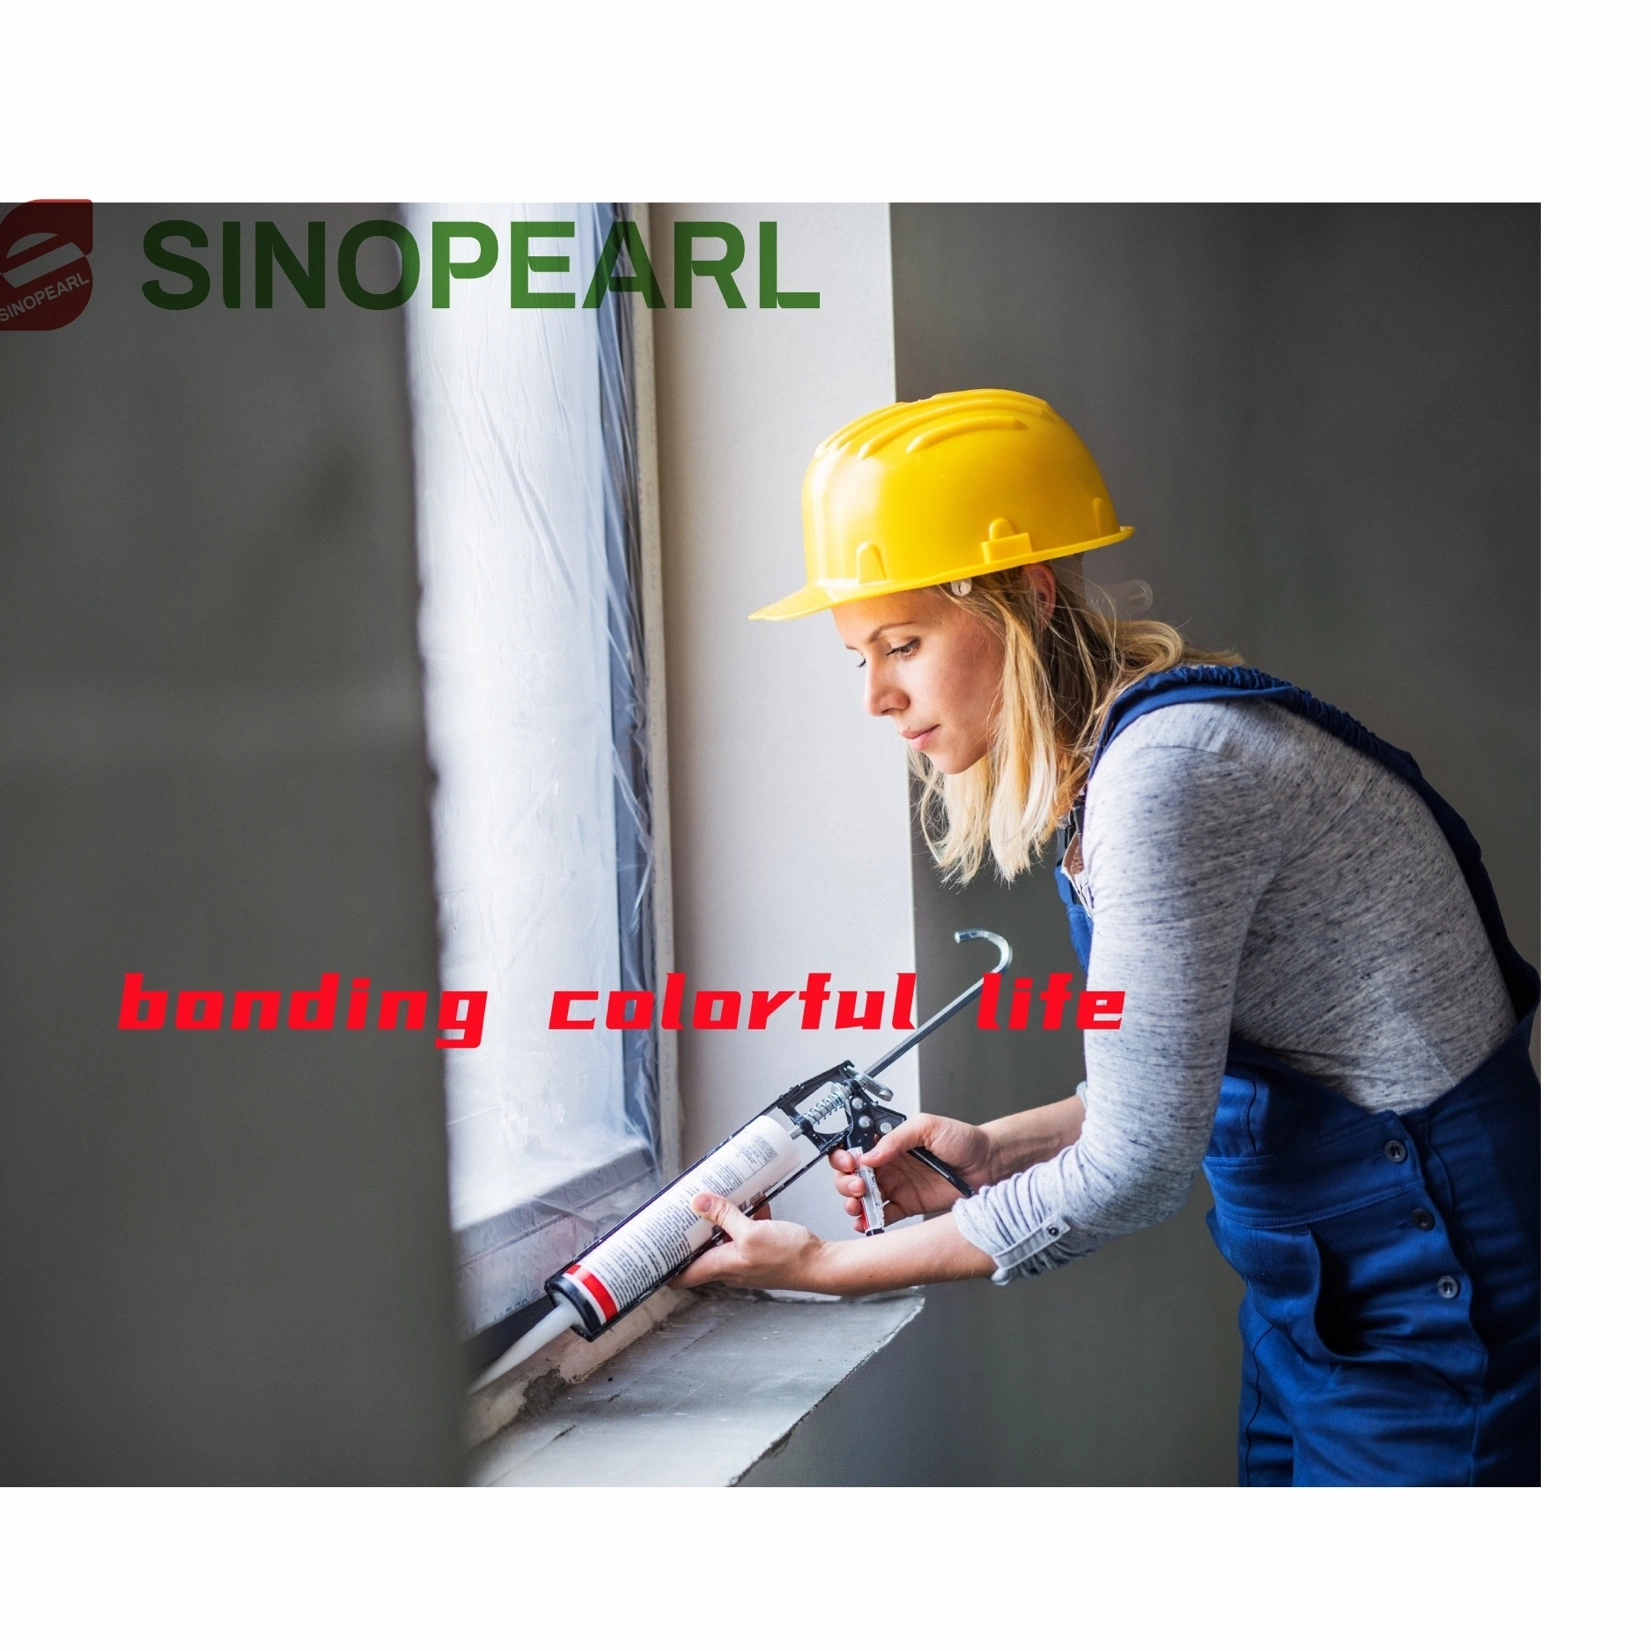 Sinopearl Bond Neutral Silicone Sealant Caulk Agent for Door and Window Weatherproof Made in China